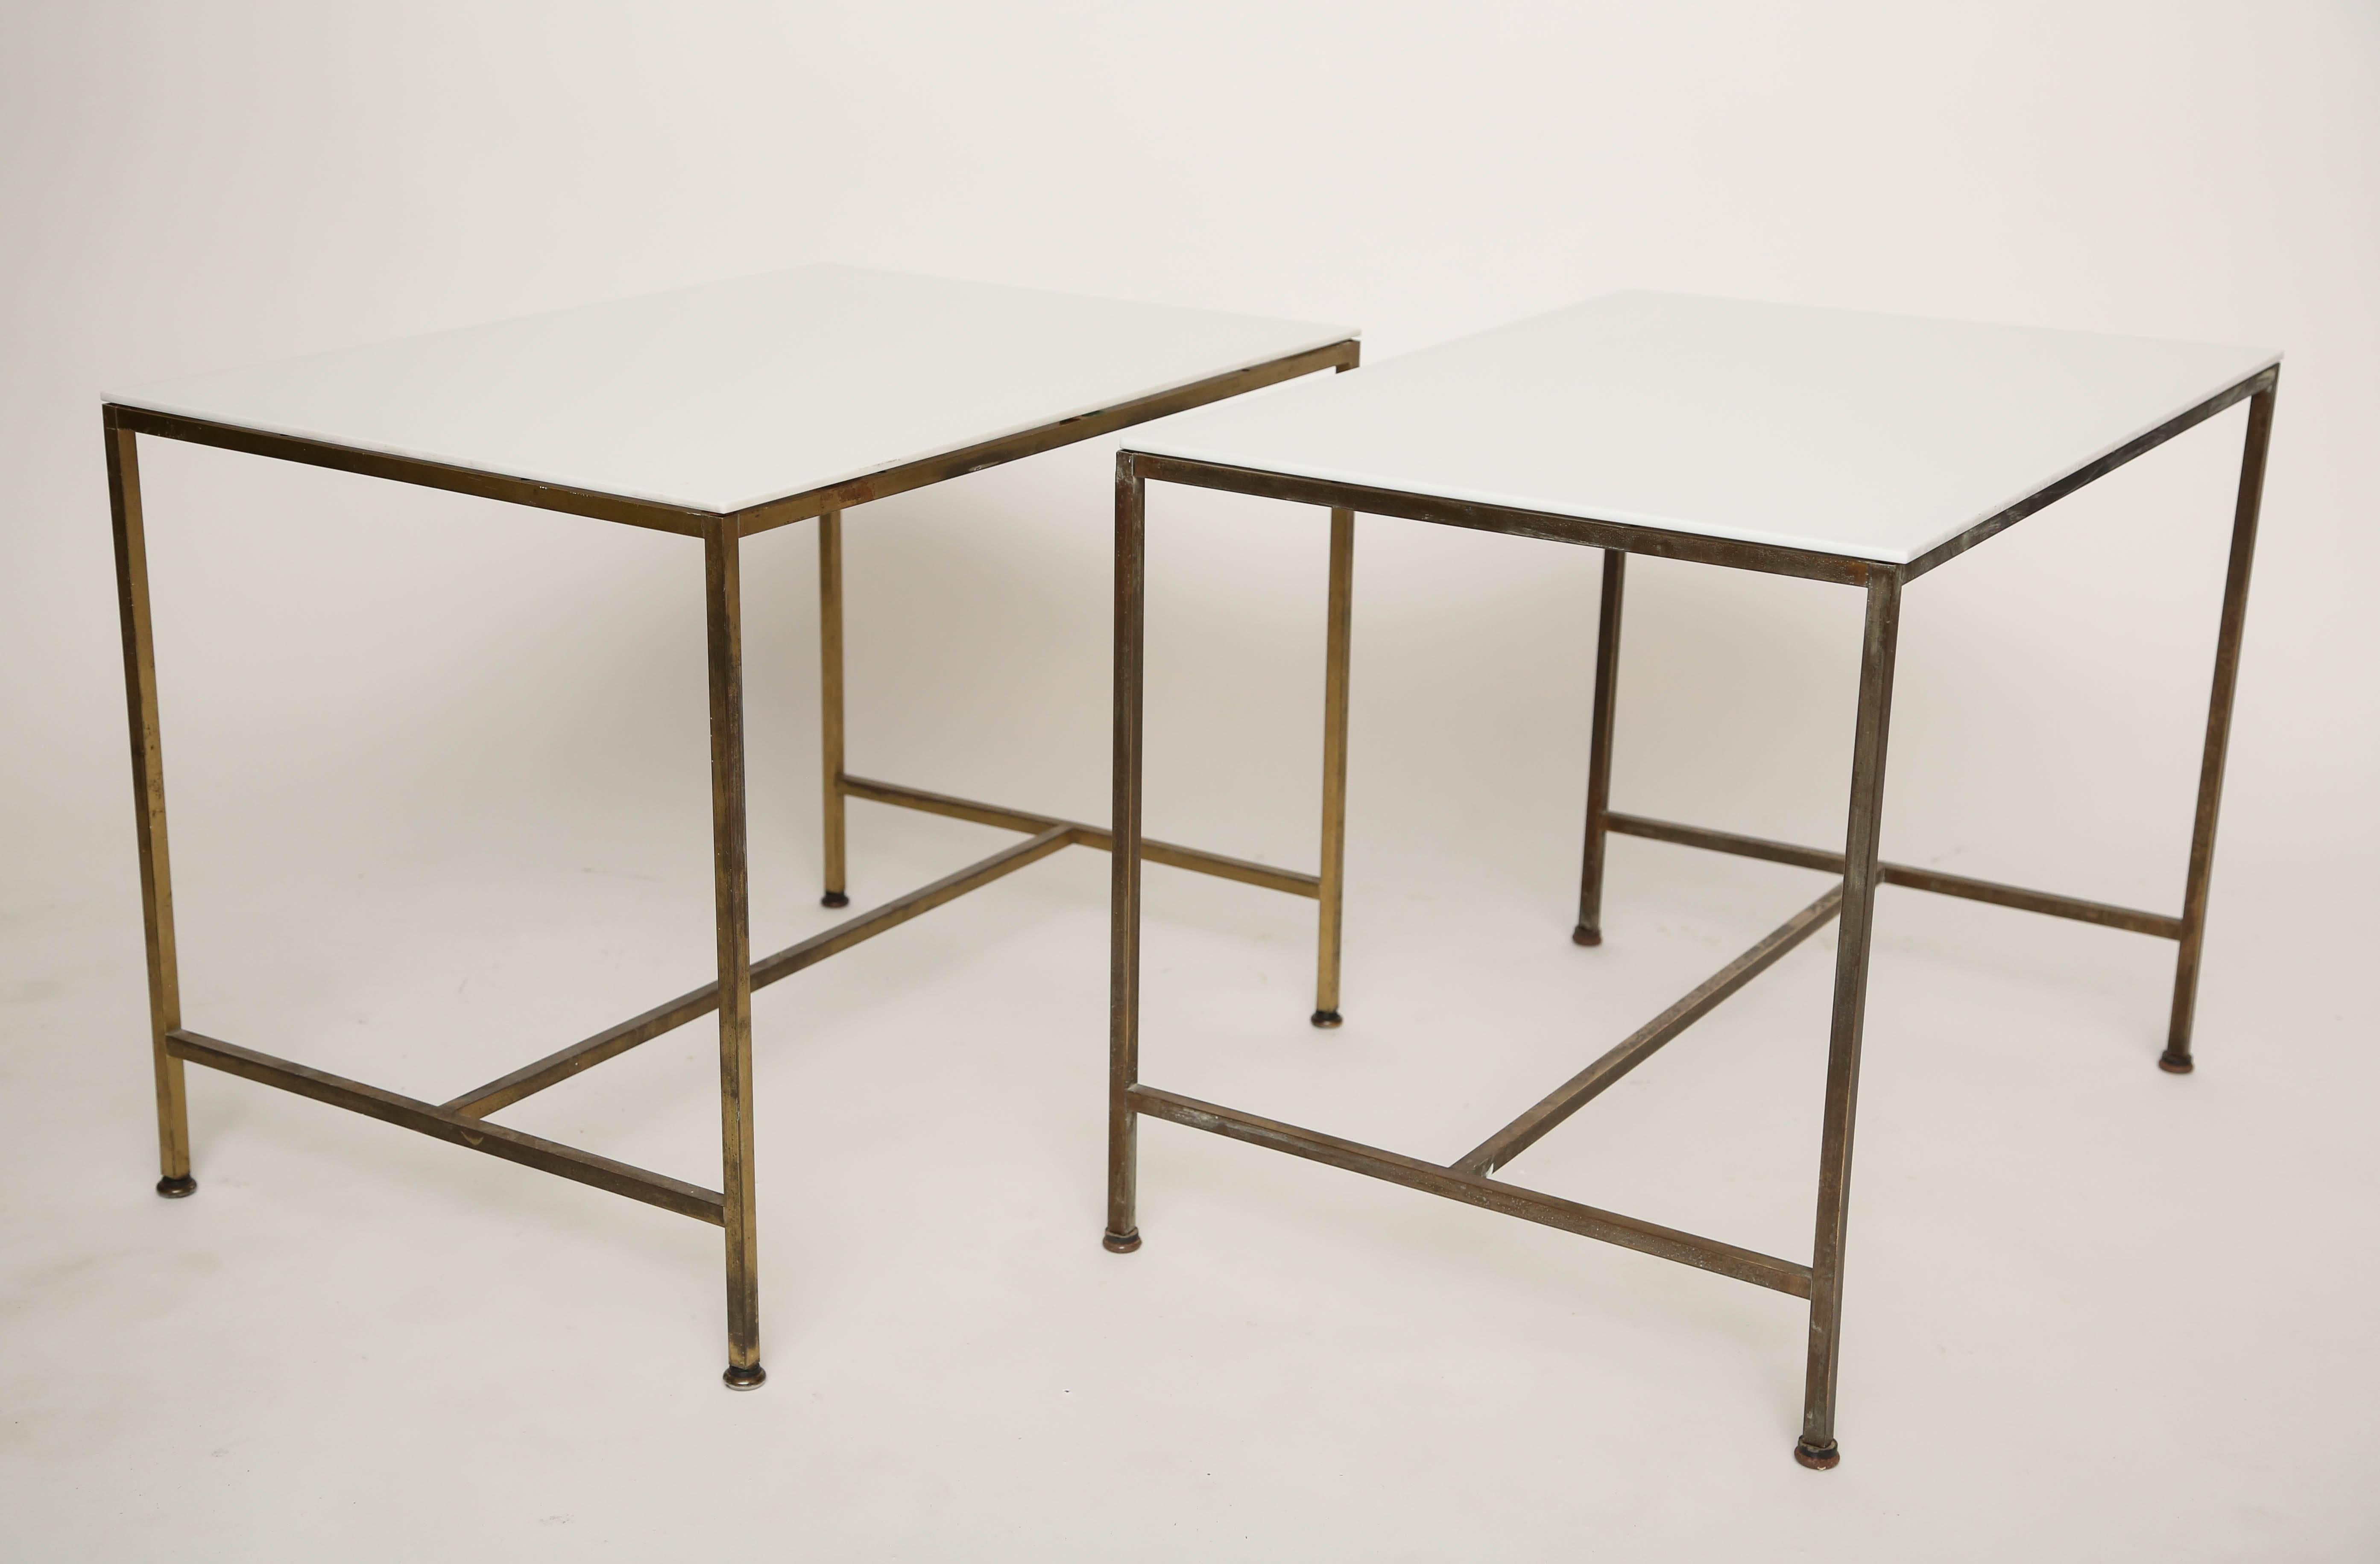 A fine pair of architectural tables manufactured by Calvin.
White glass top's.